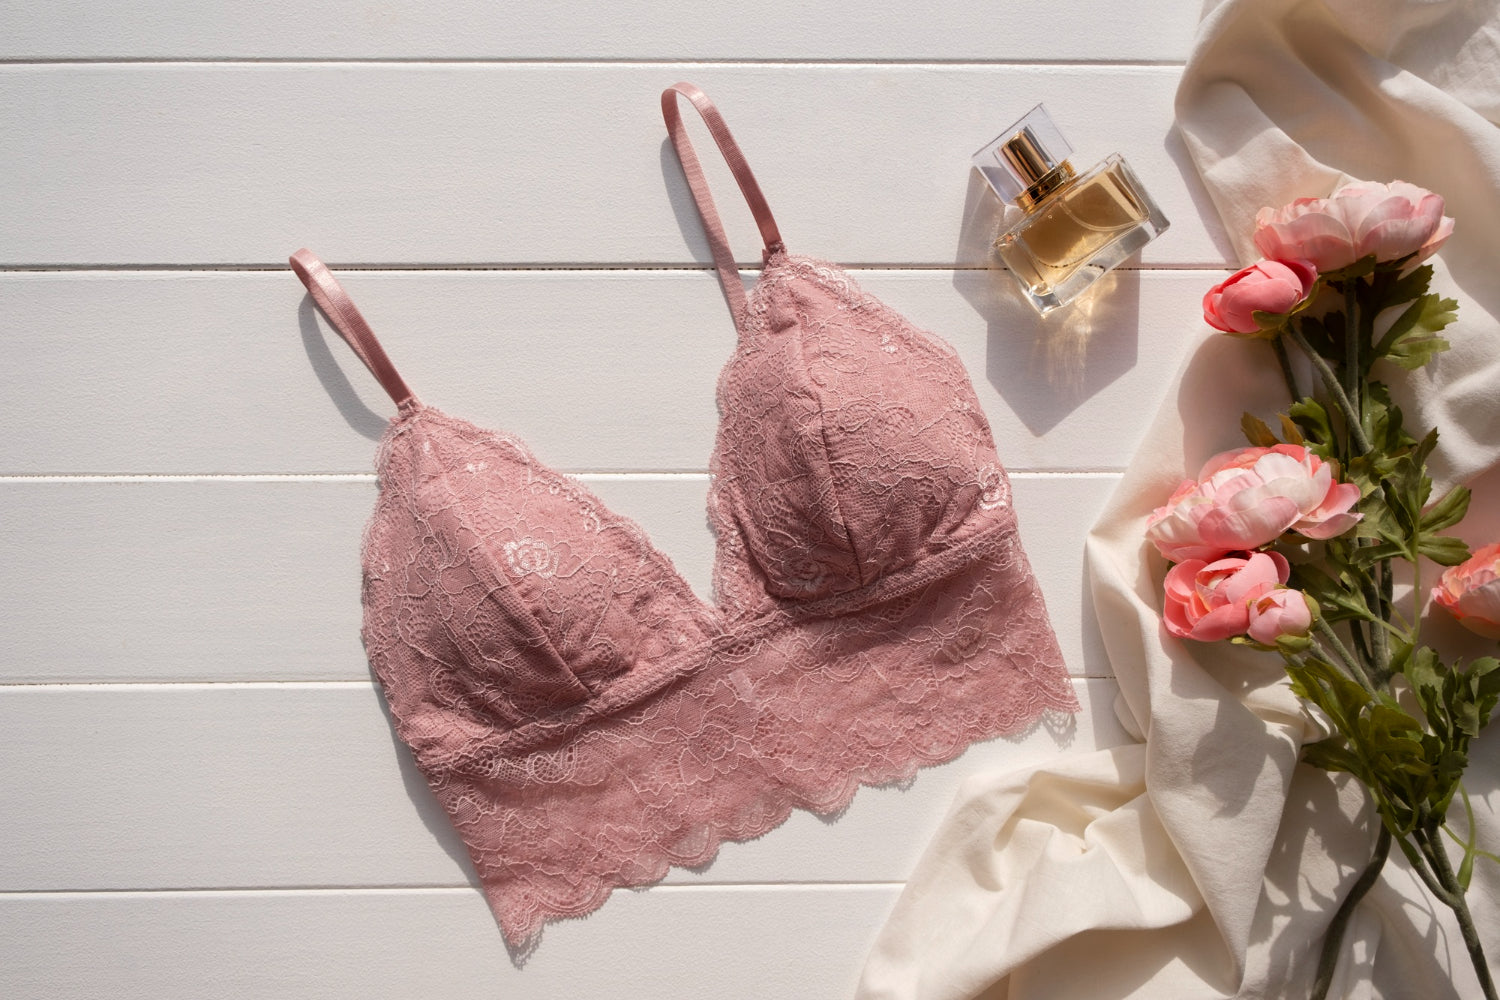 How to start an online lingerie shop, and what are the major